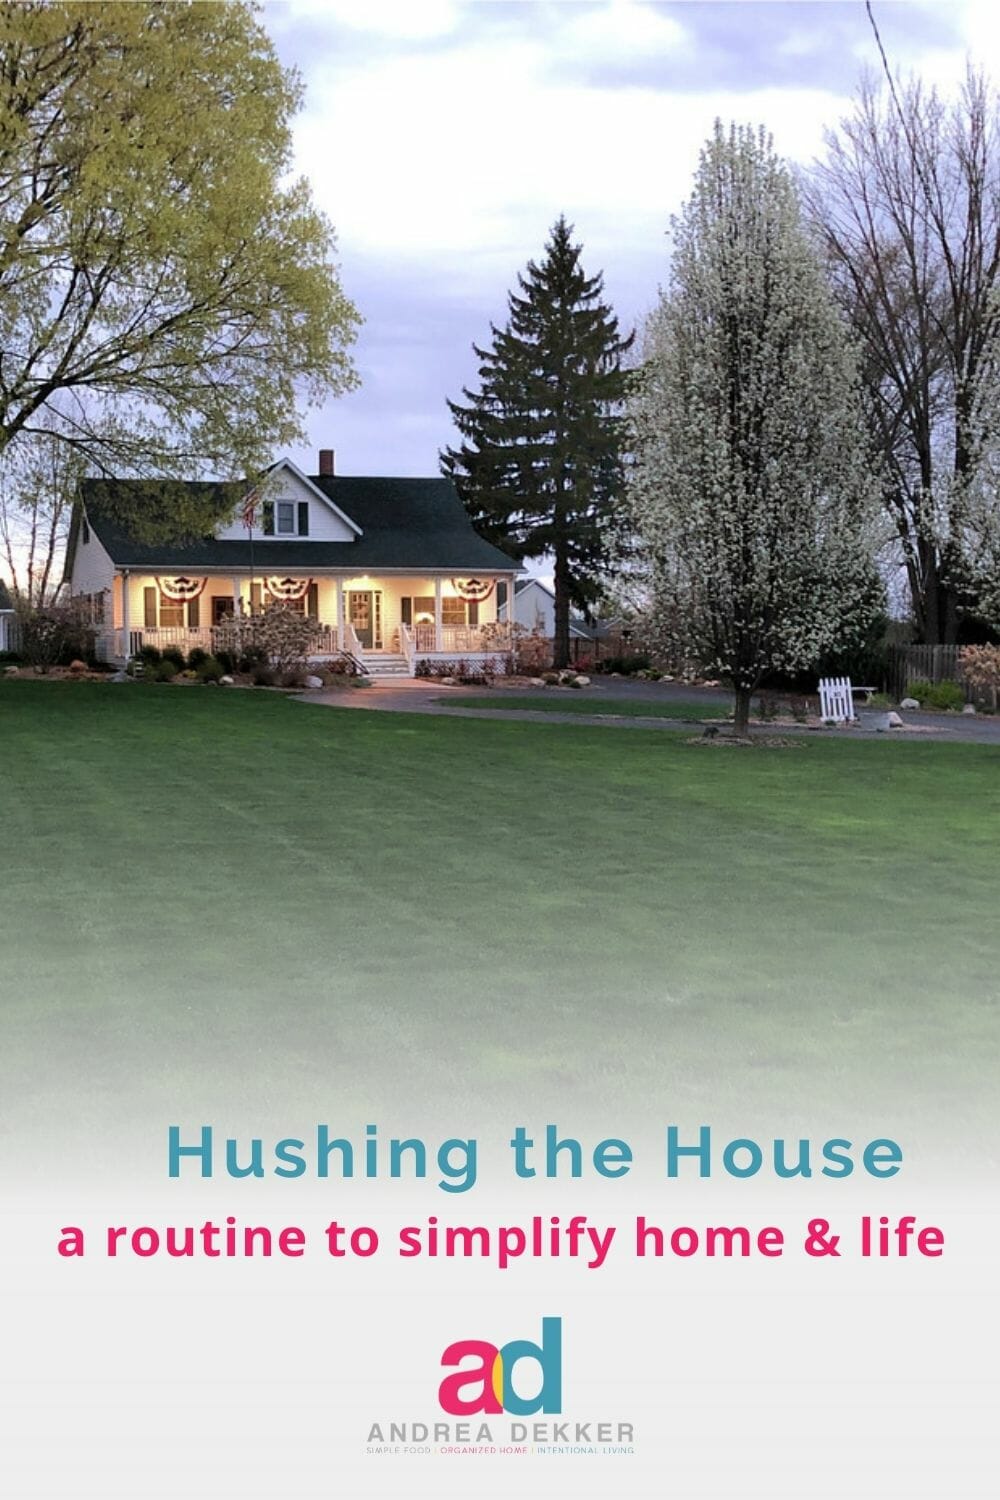 Have you ever wondered why you just can't seem to "get ahead"? Learn how "hushing your house" each evening might just be the routine you need to simplify your home and life! via @andreadekker